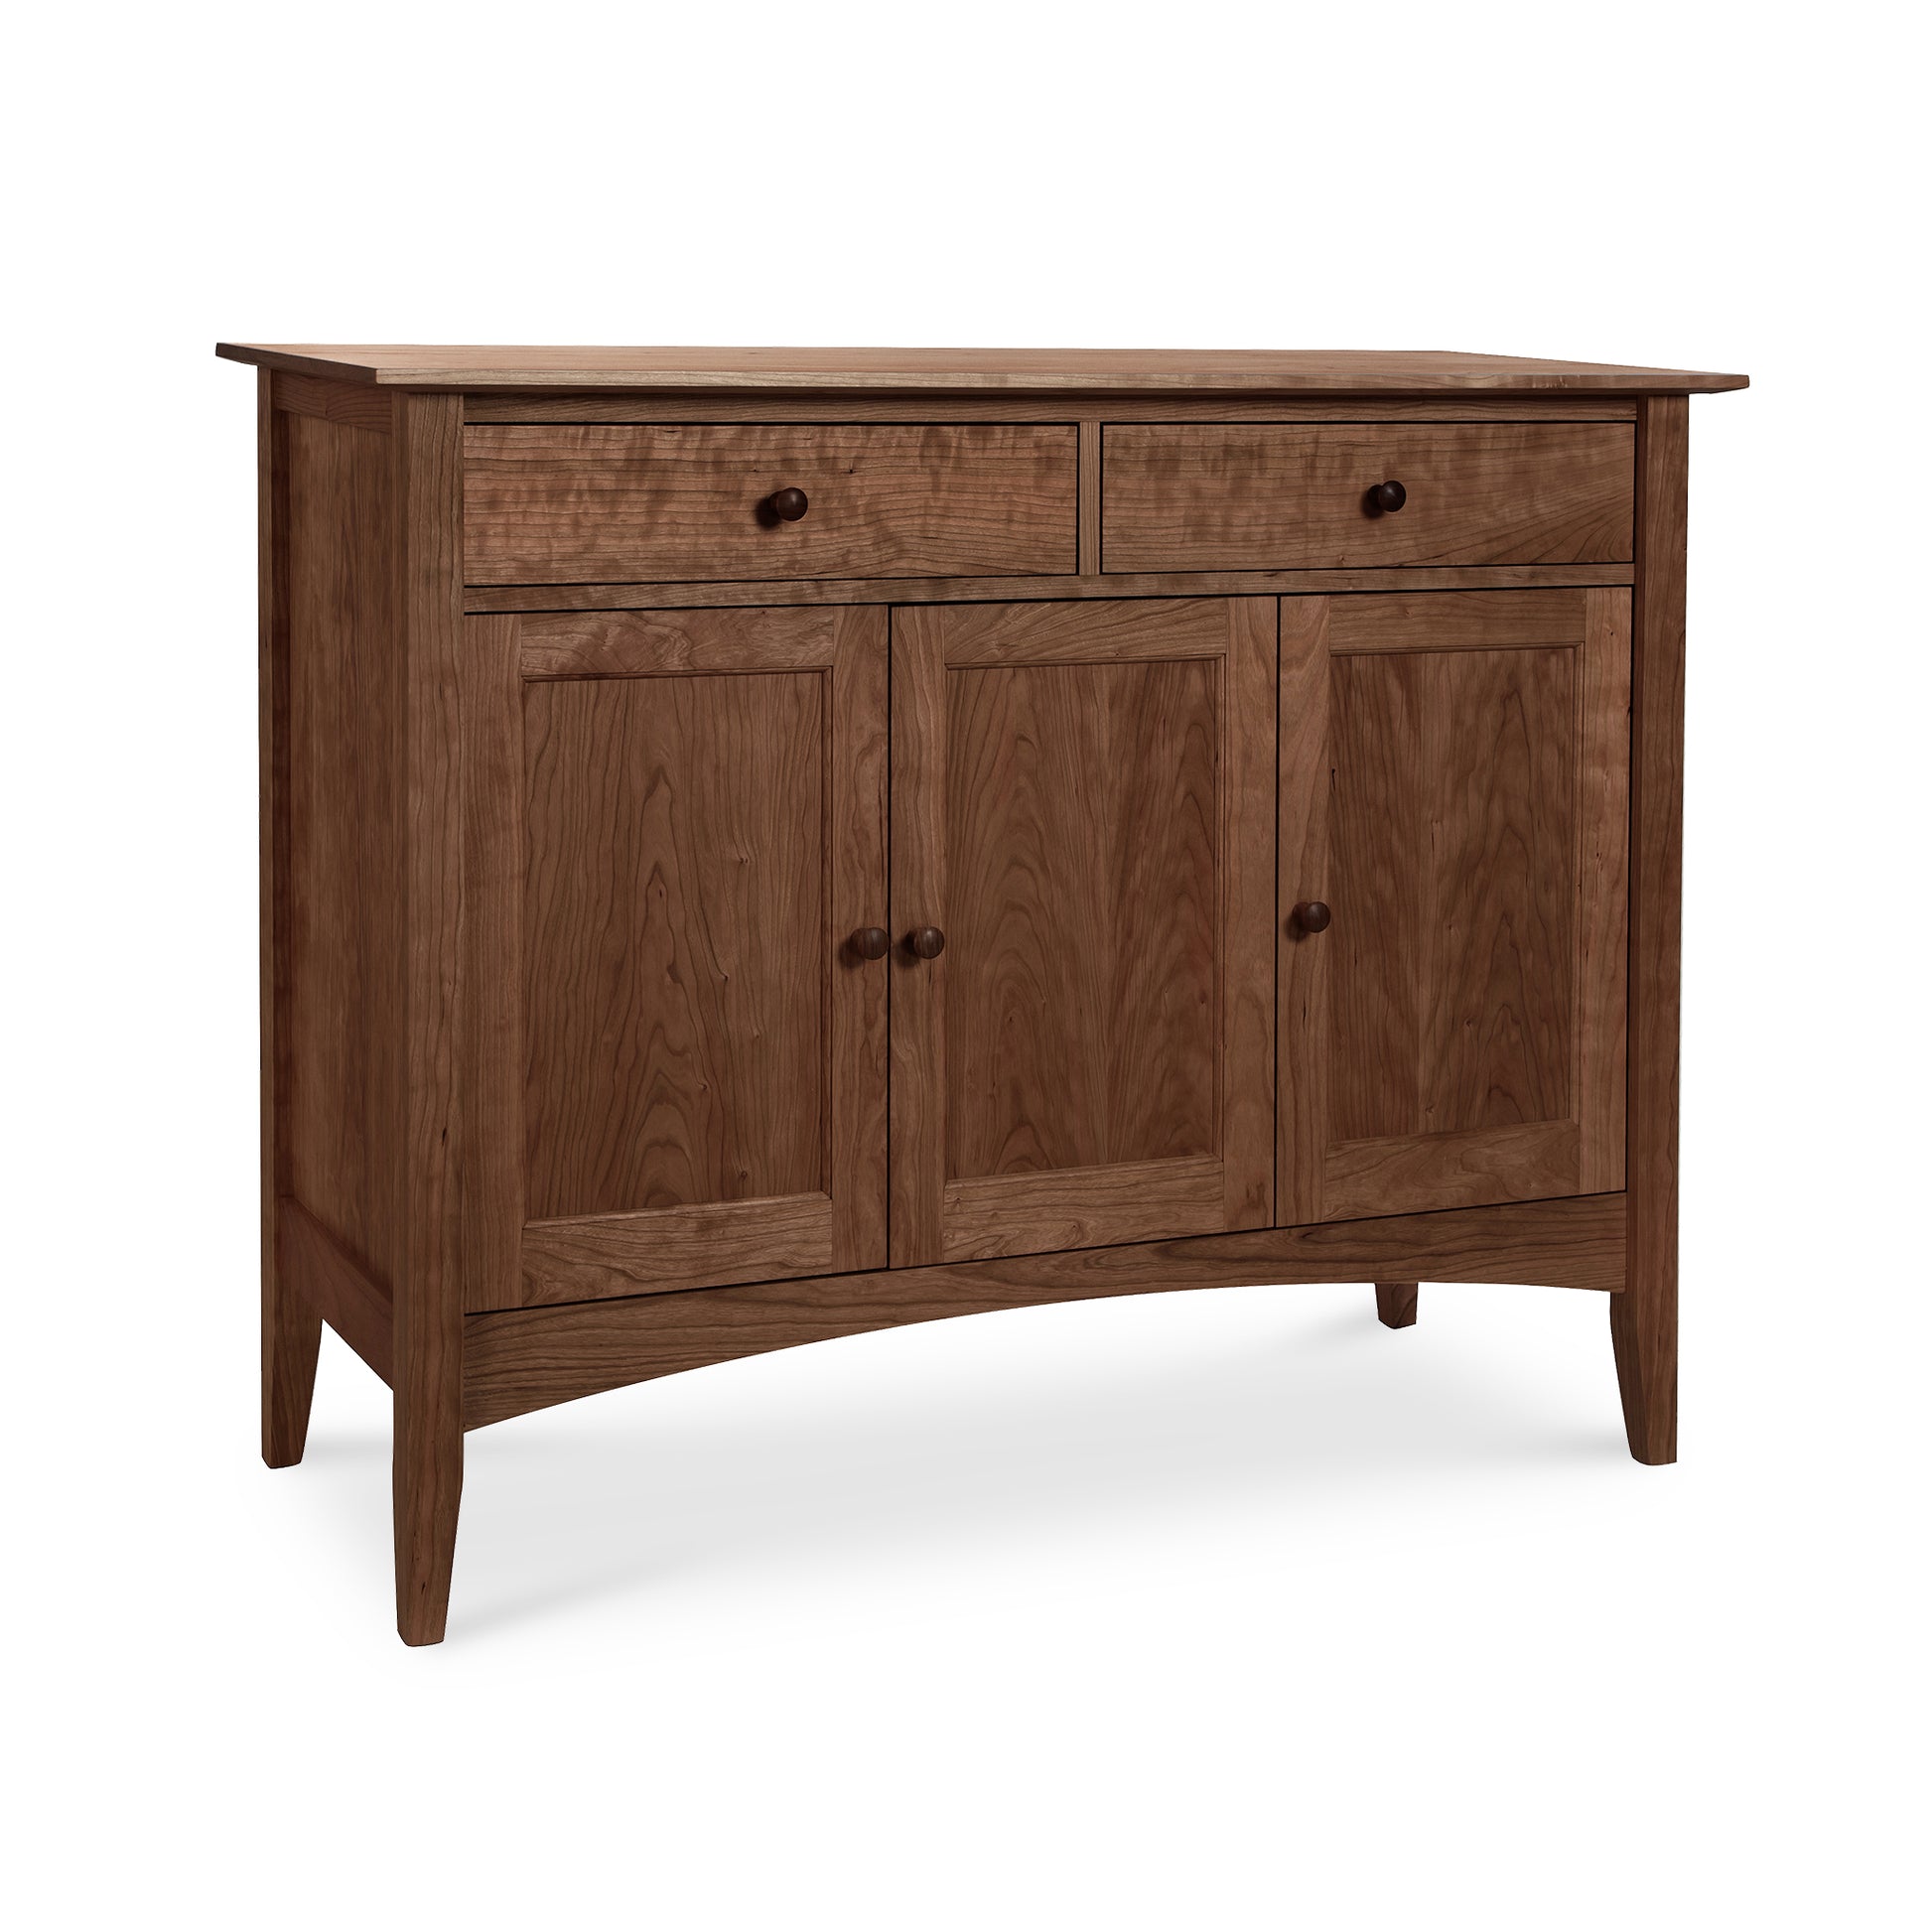 An American Shaker Sideboard by Maple Corner Woodworks with a smooth finish featuring two top drawers and three cabinet doors, all with round knobs. The furniture, exemplifying Vermont craftsmanship, stands on slightly tapered legs.